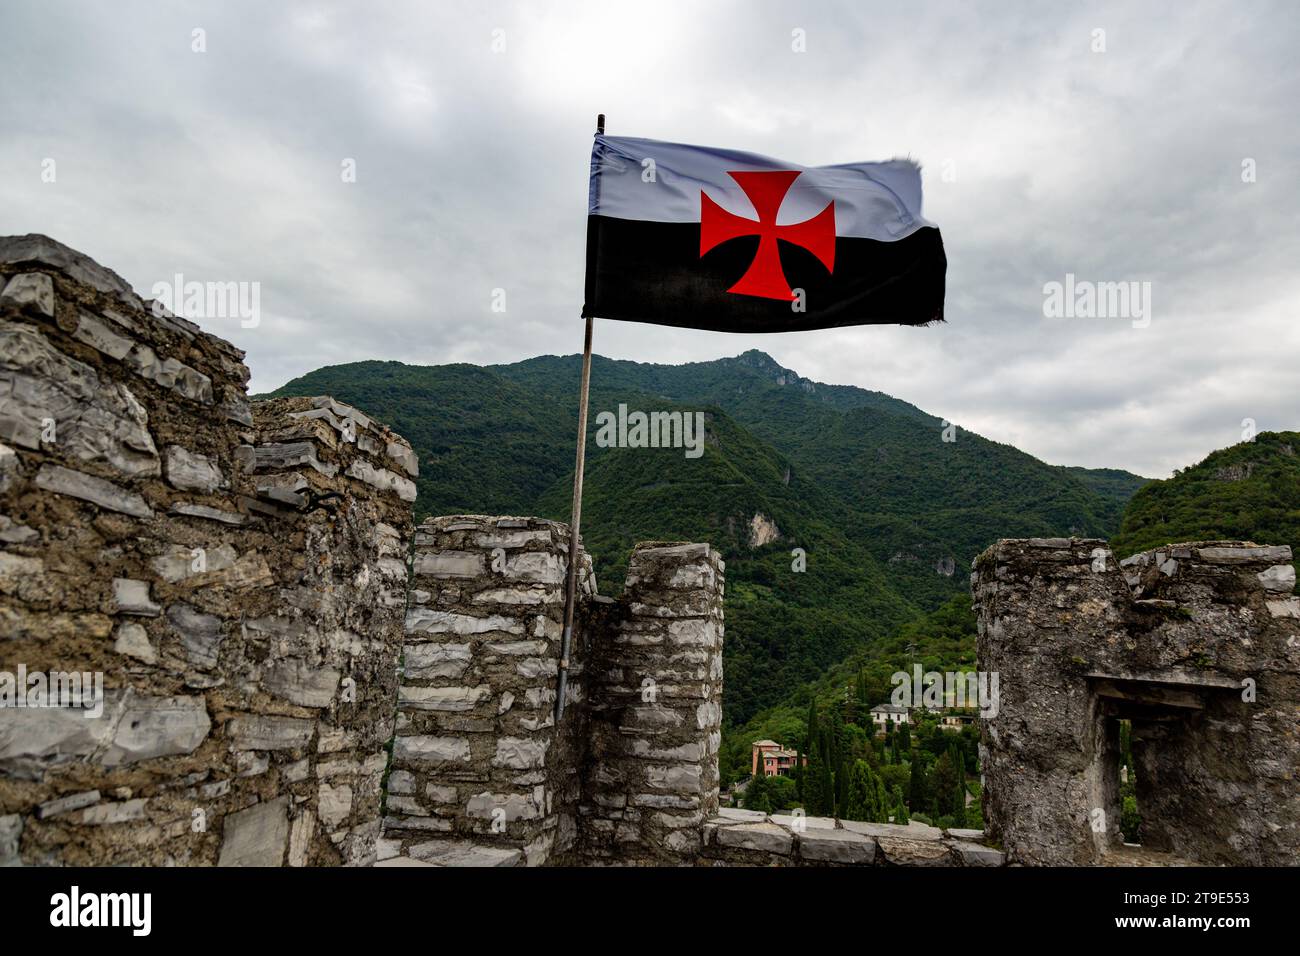 The flag of the Knights Templar flies upside down over Vezio Castle in Perledo, Lombardy, Italy. Stock Photo